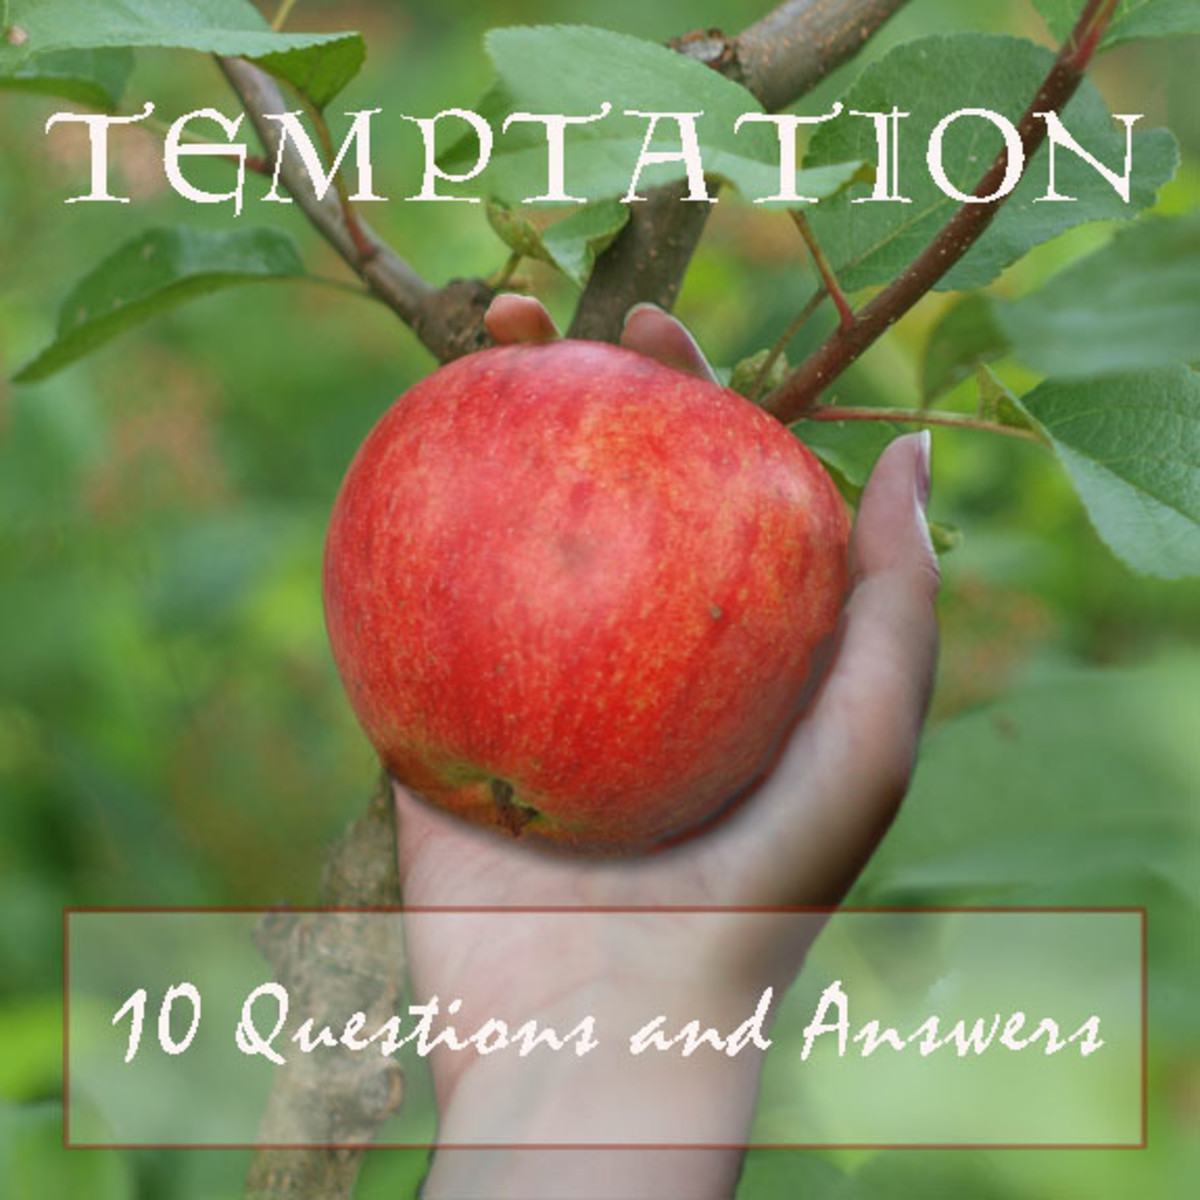 Temptation: 10 Questions and Answers